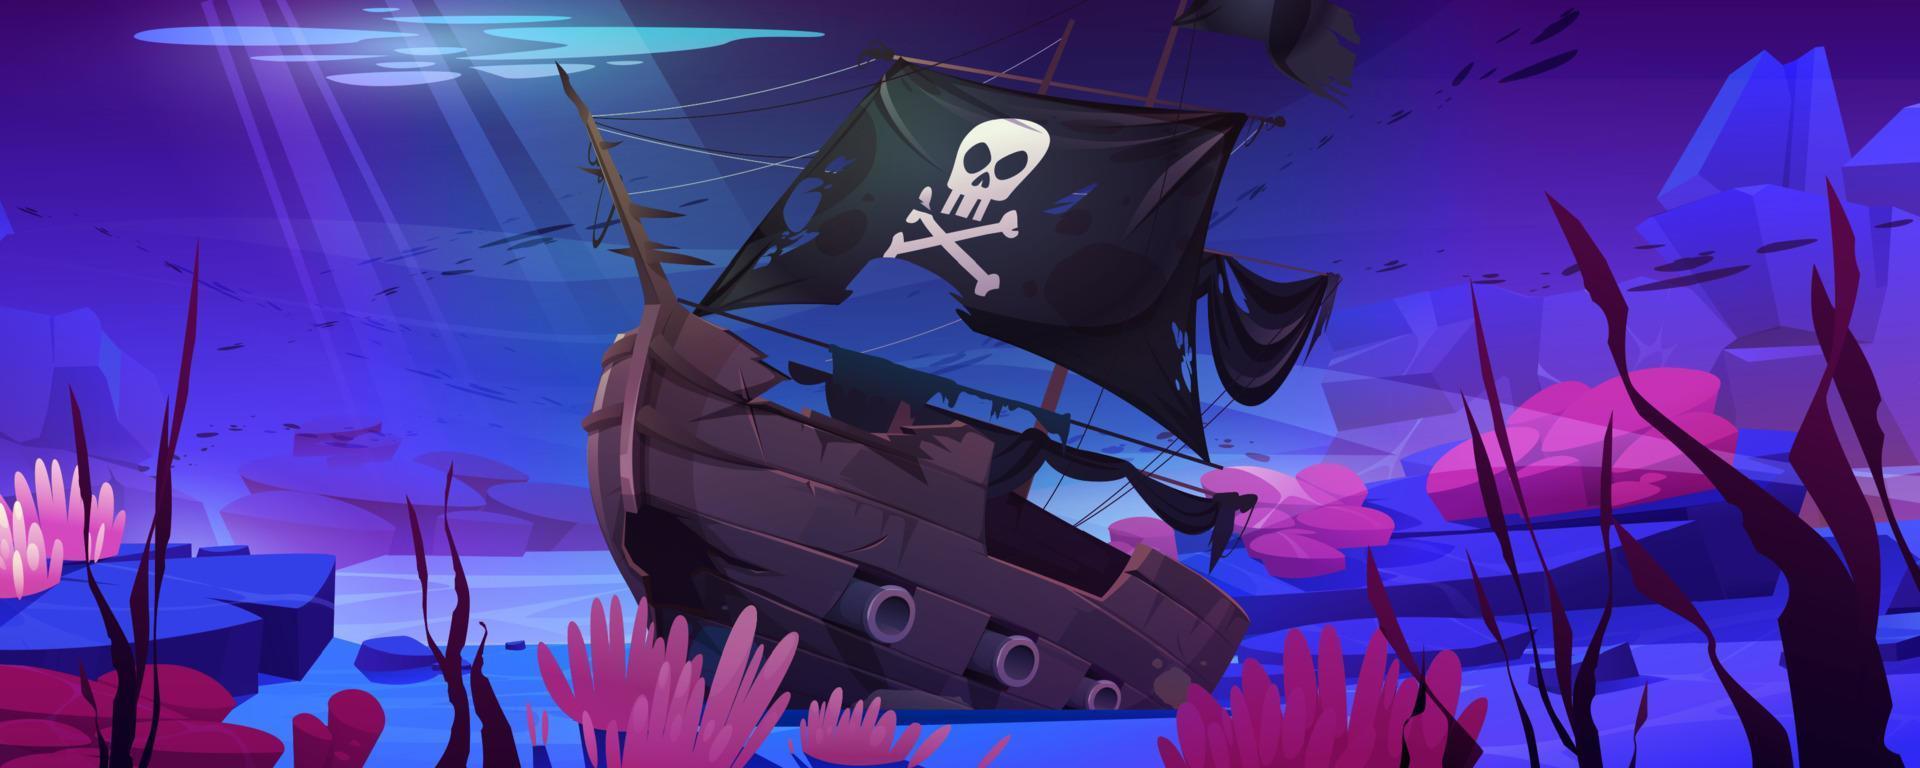 Wreck pirate ship, sunken boat with jolly roger vector